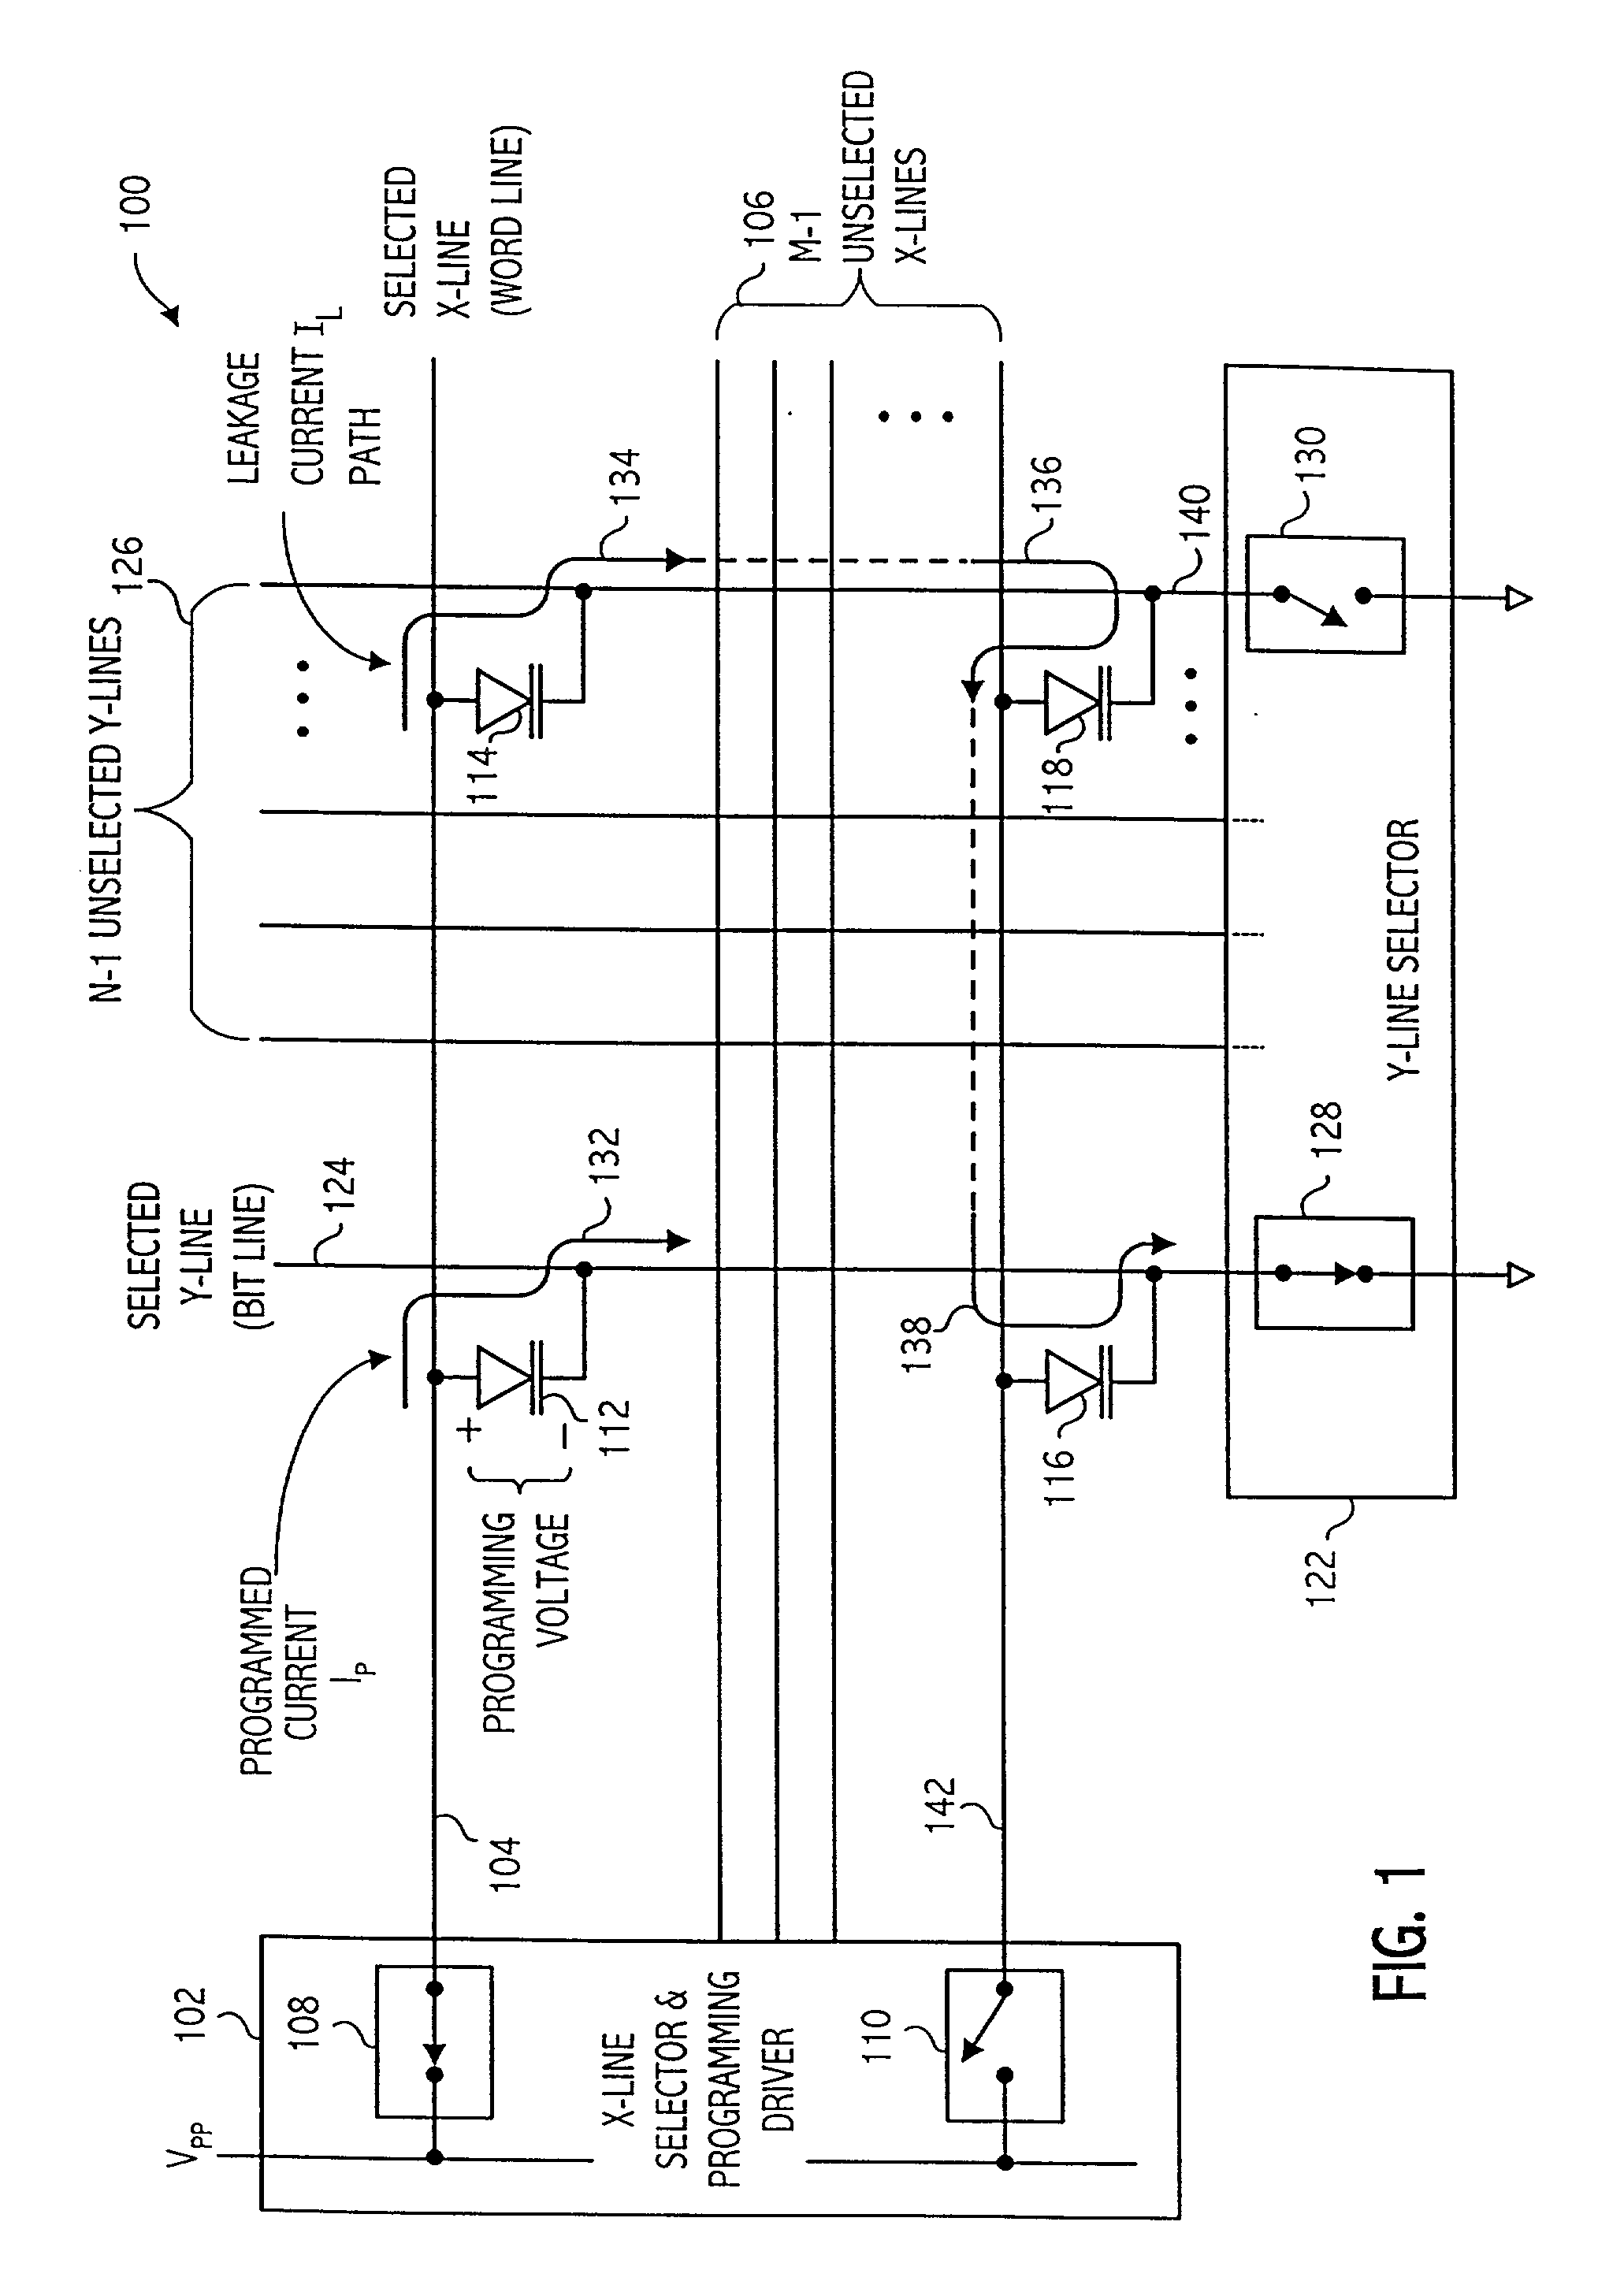 Method and apparatus for biasing selected and unselected array lines when writing a memory array